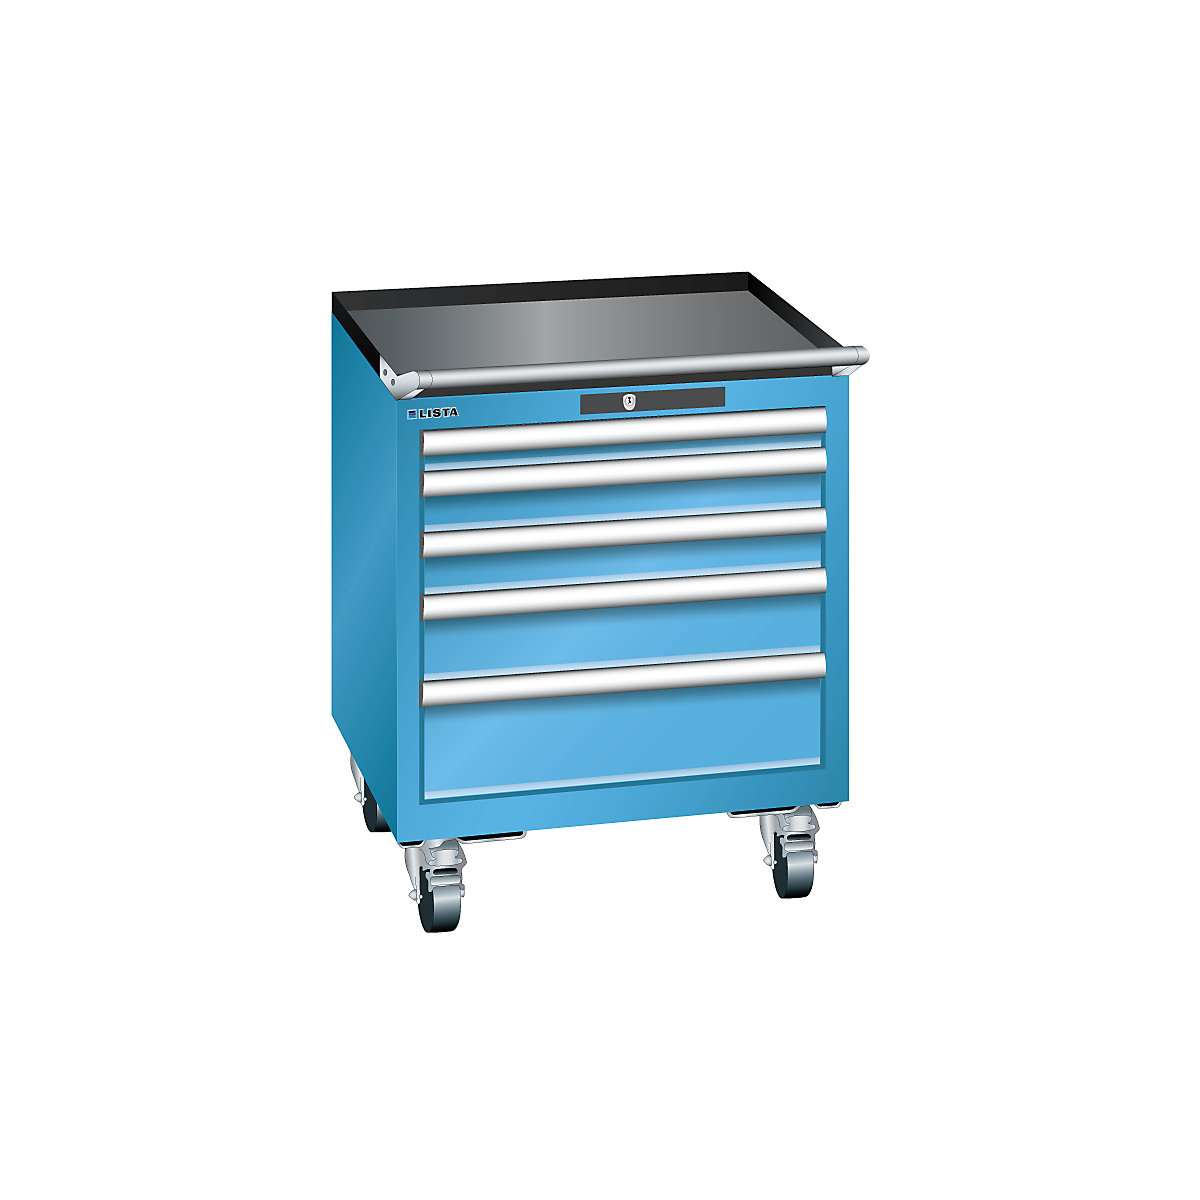 Drawer cupboard, width 564 mm, mobile – LISTA, 5 drawers, HxD 723 x 572 mm, light blue-8